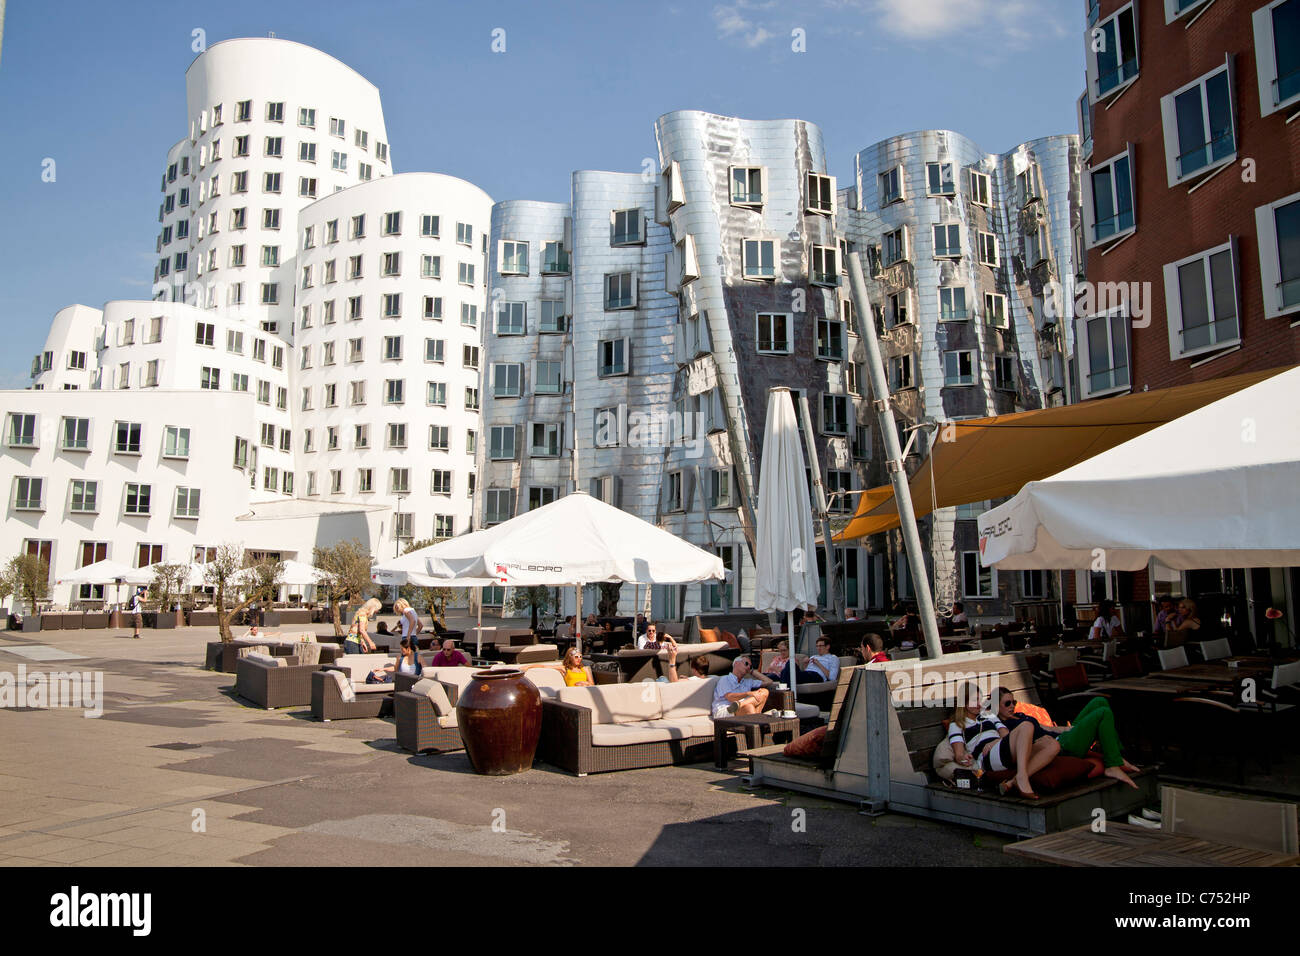 Restaurant at The Neue Zollhof  designed by  architect Frank O. Gehry of Media Harbor in  Duesseldorf,  Germany Stock Photo